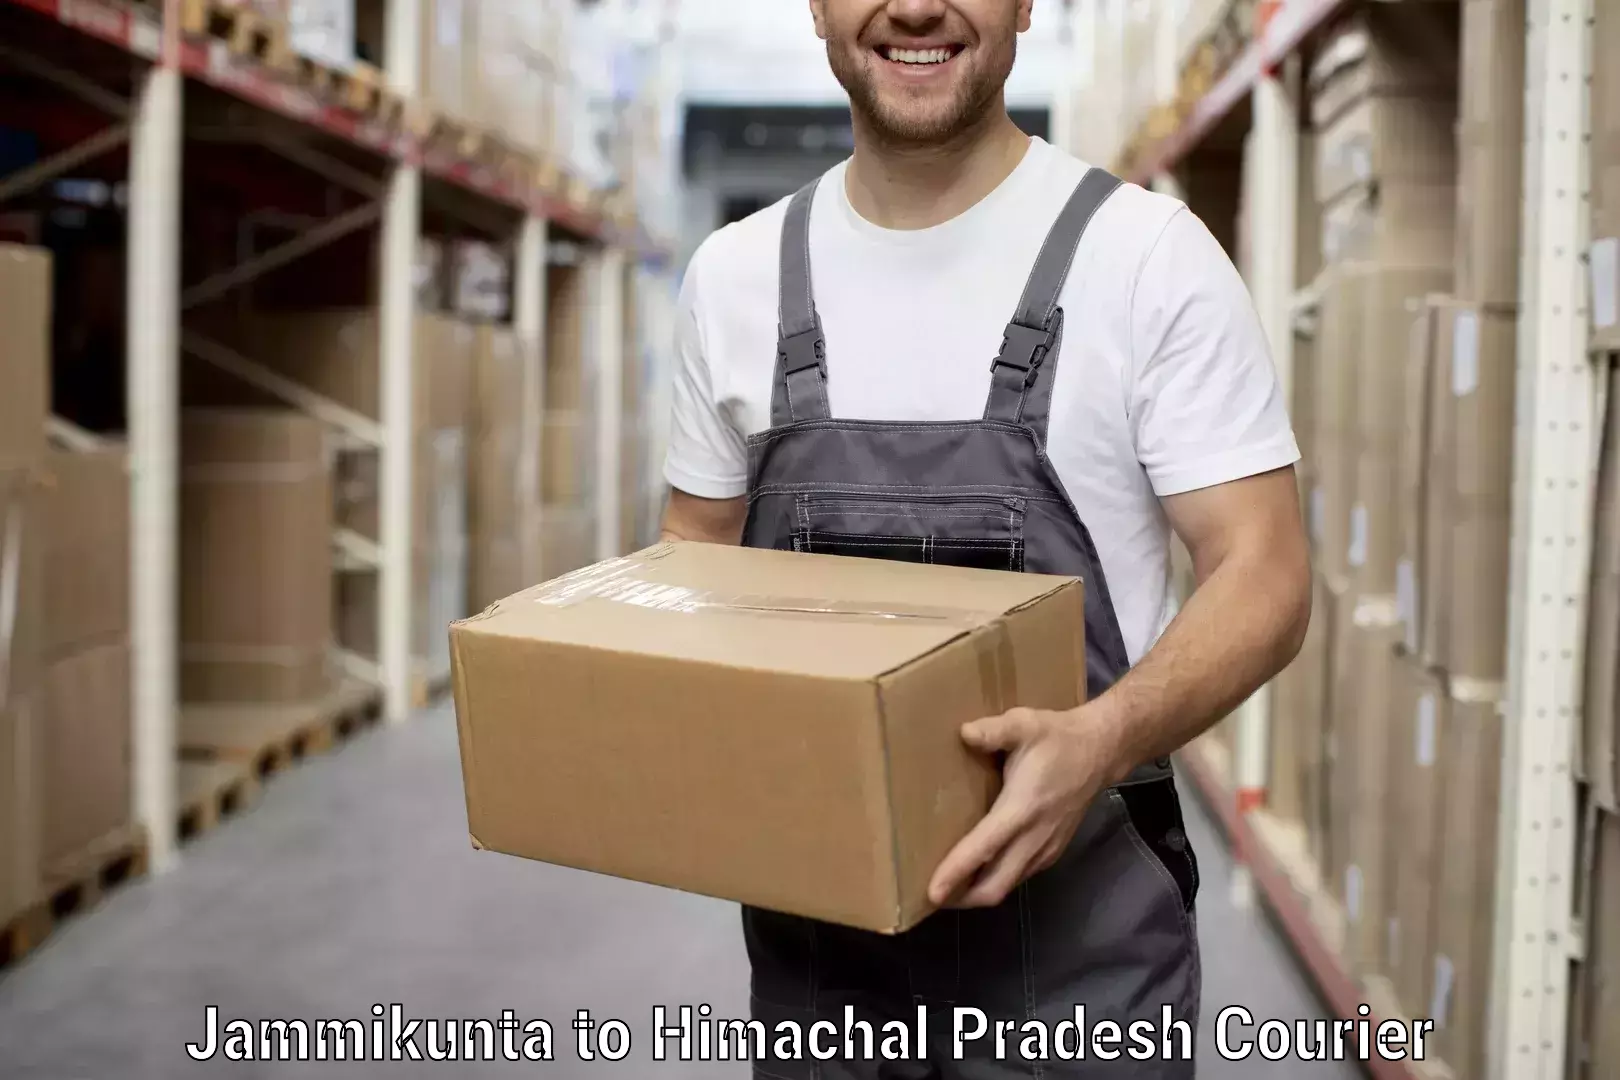 Quality relocation services in Jammikunta to Jukhala